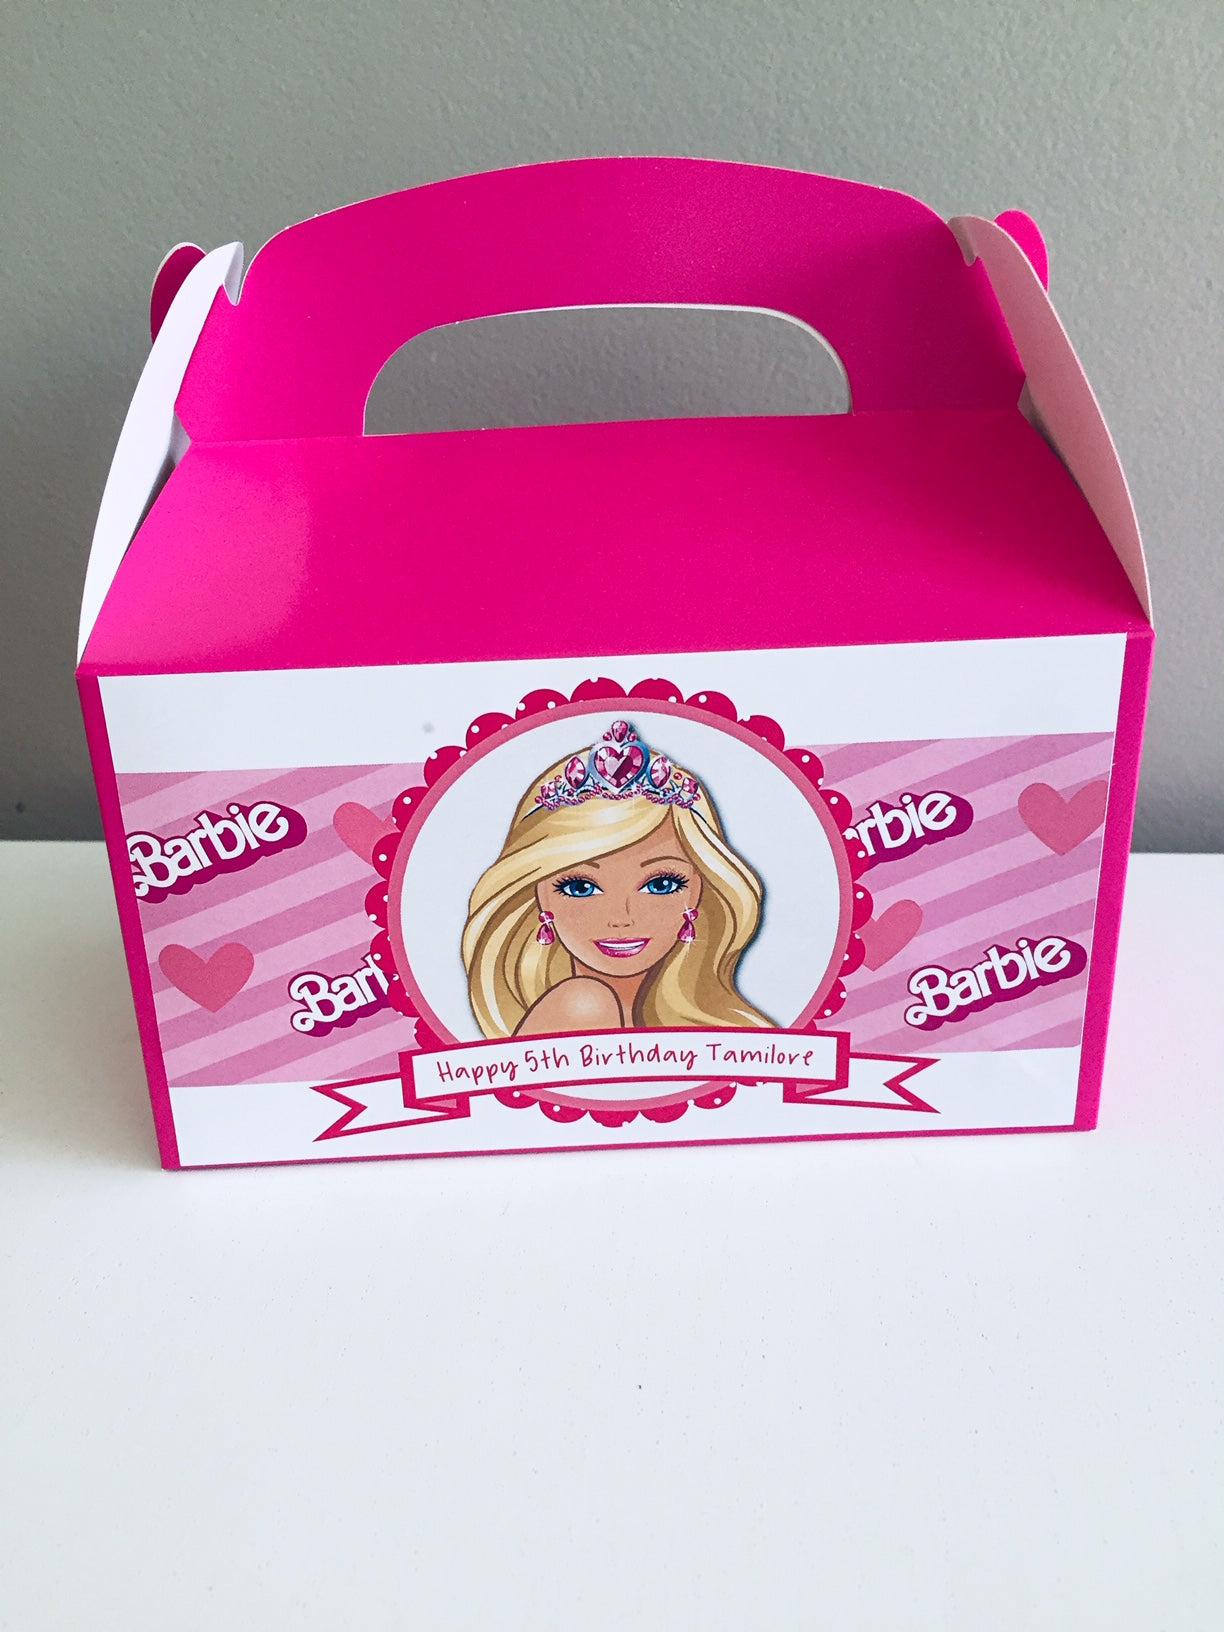 Barbie personalised gift boxes